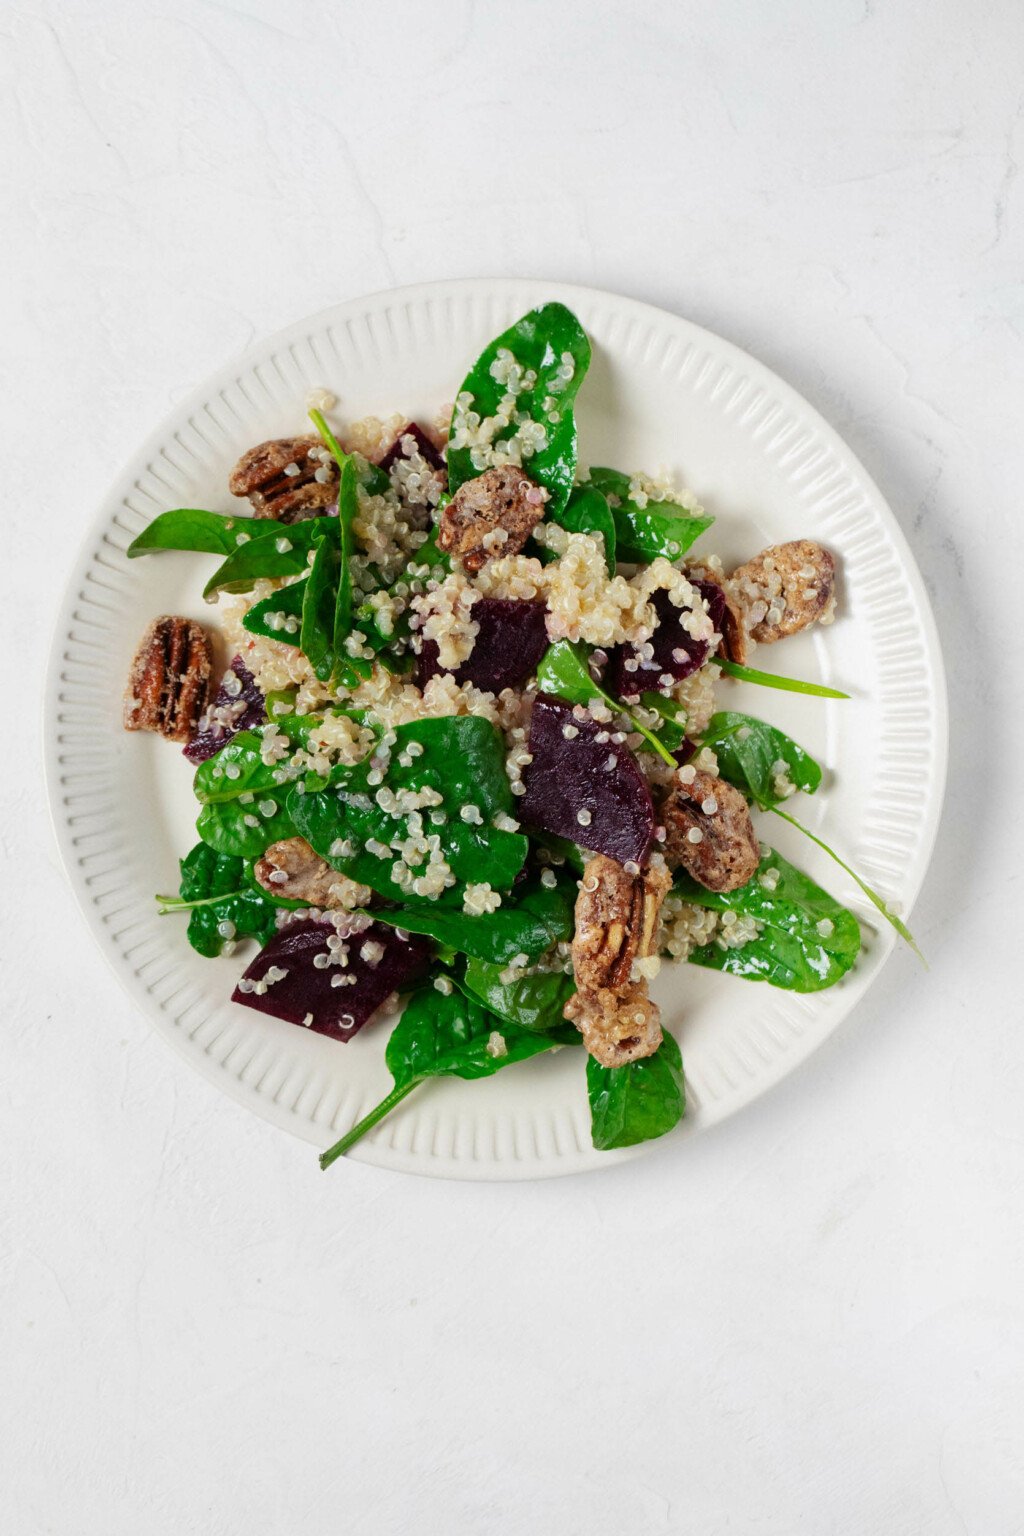 An overhead image of a round, rimmed white plate, which is serving a vegan quinoa and beet salad with crispy pecans.